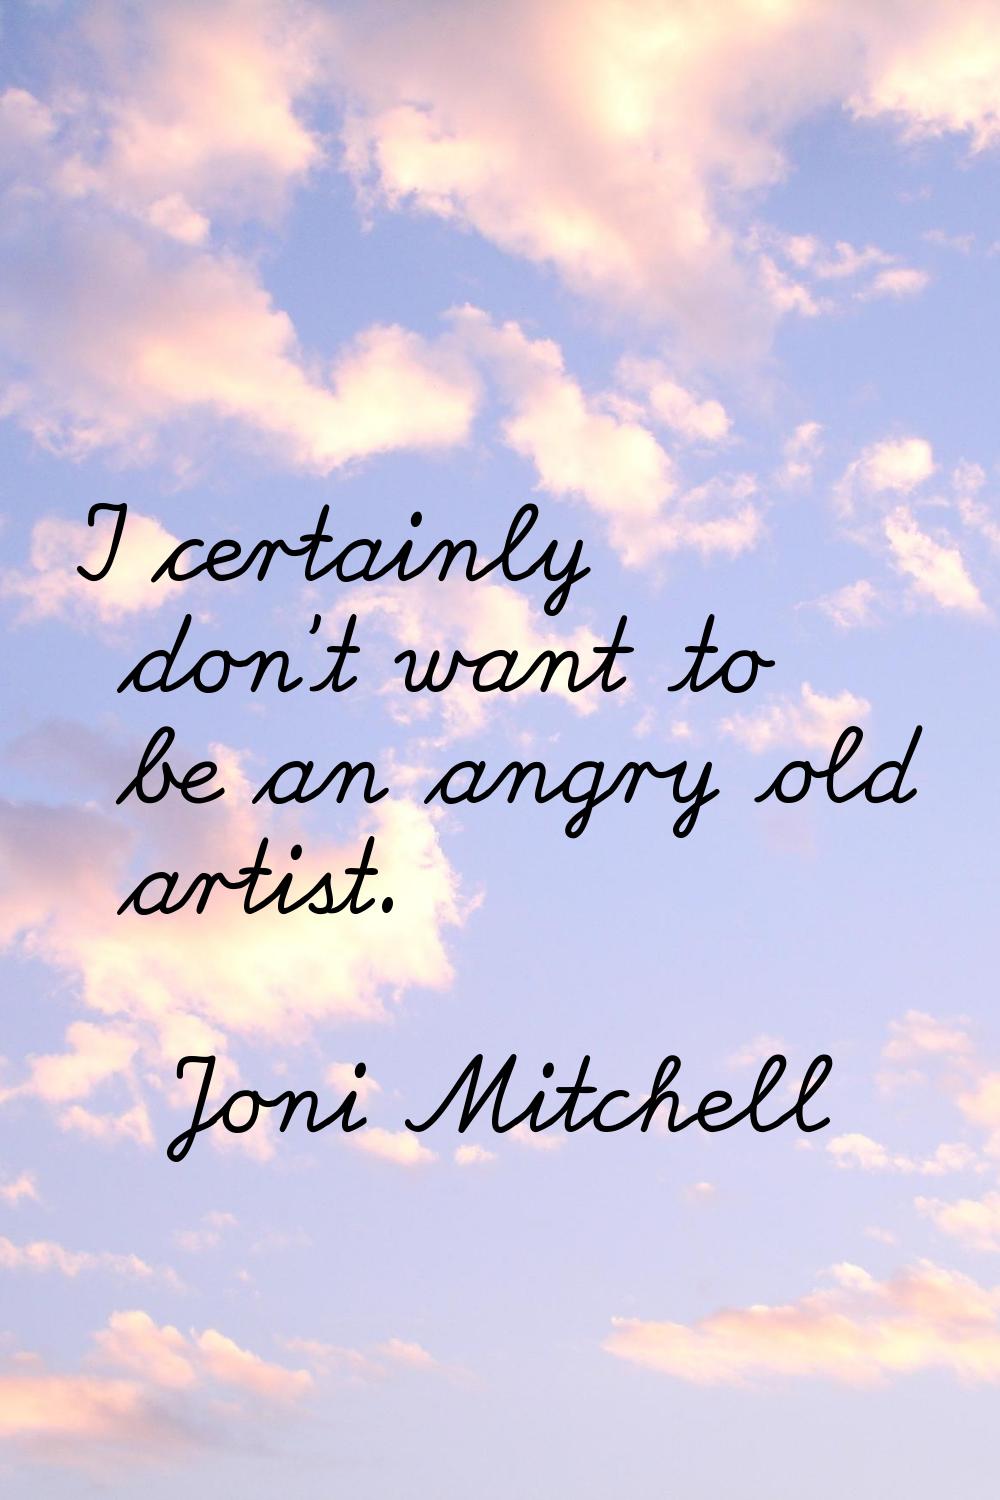 I certainly don't want to be an angry old artist.